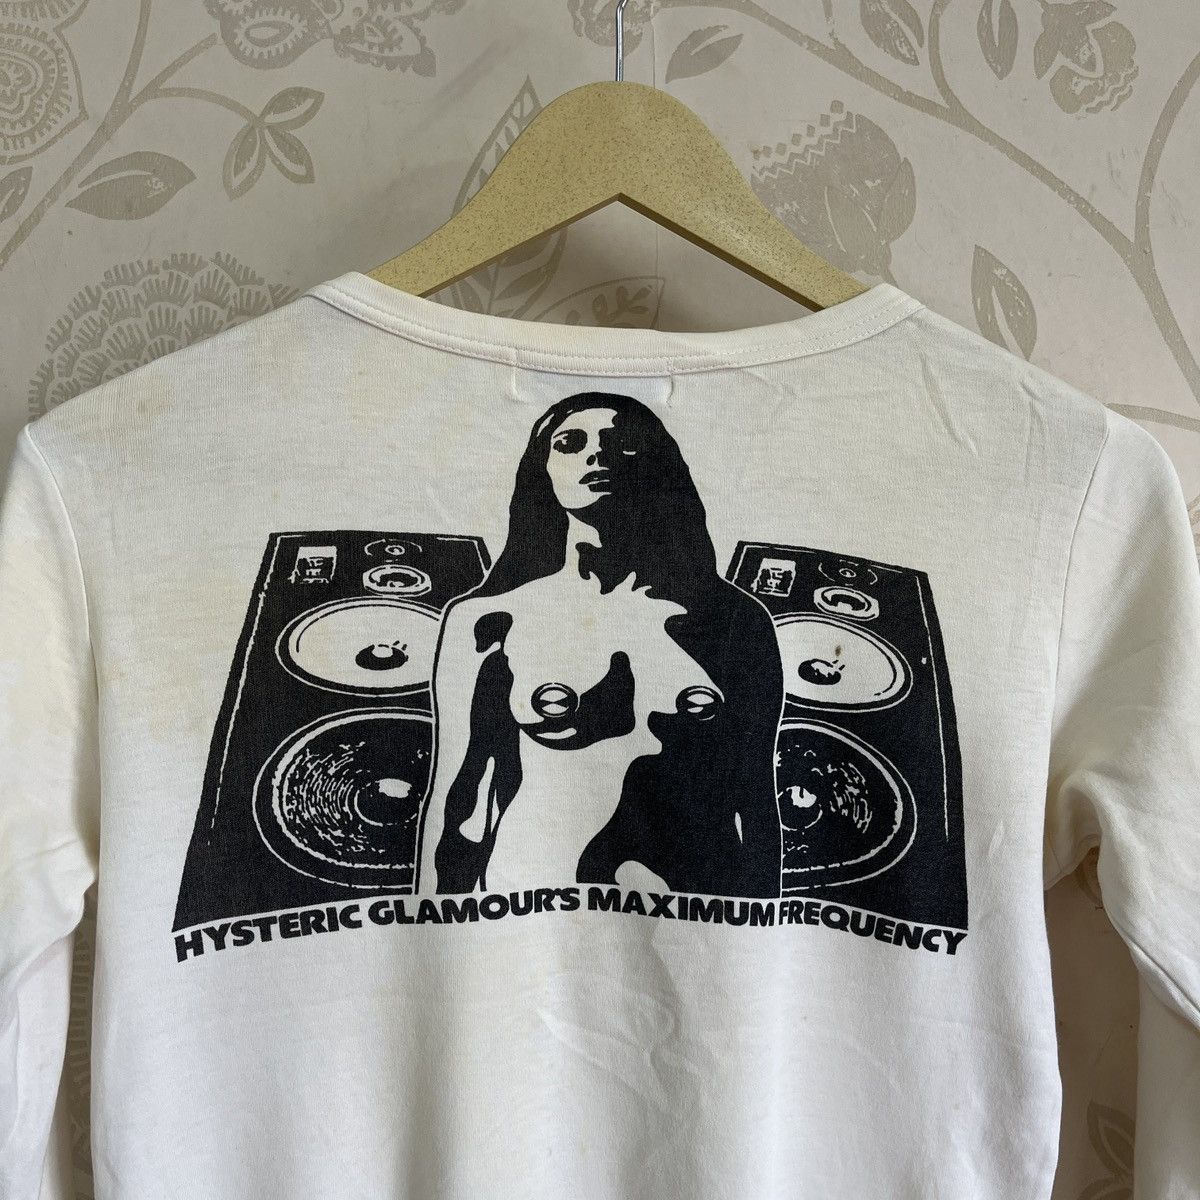 Vintage Hysteric Glamour Maximum Frequency - 18